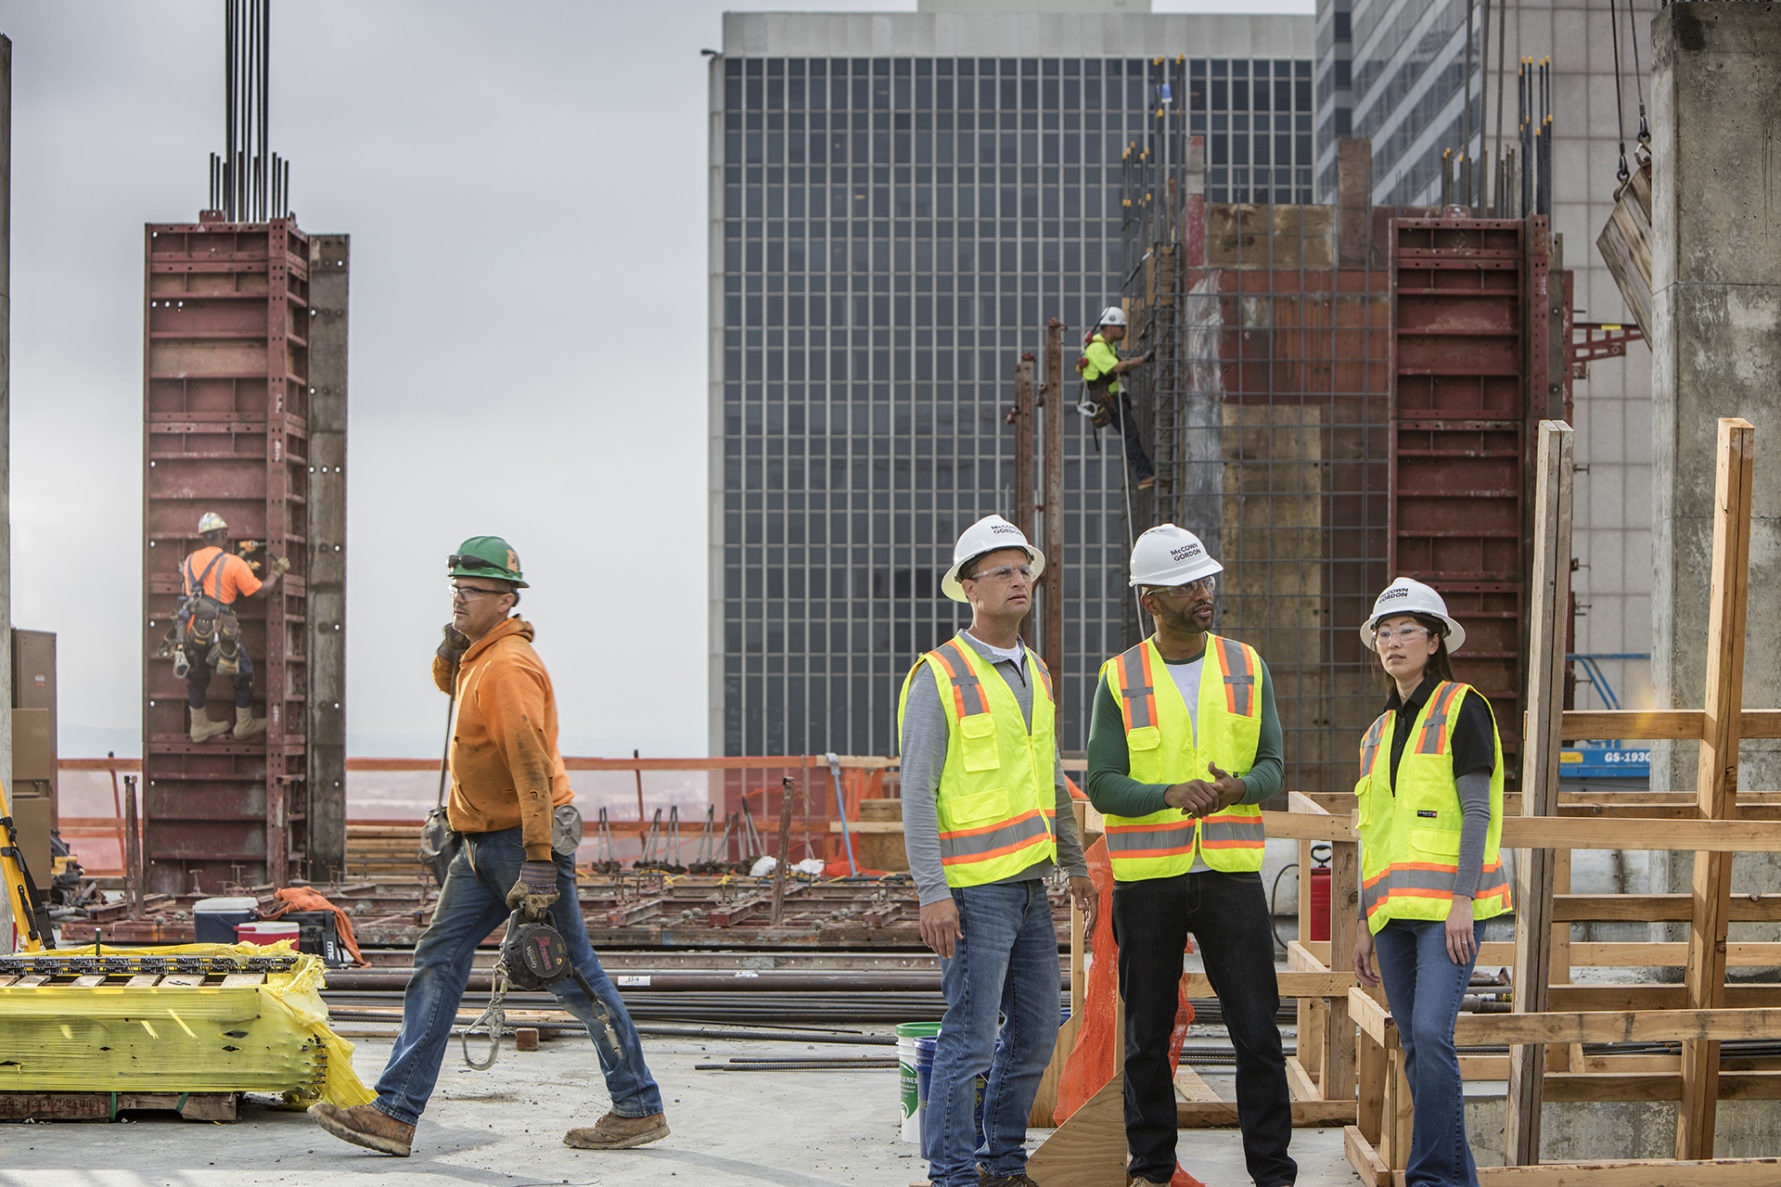 construction workers inspecting a jobsite